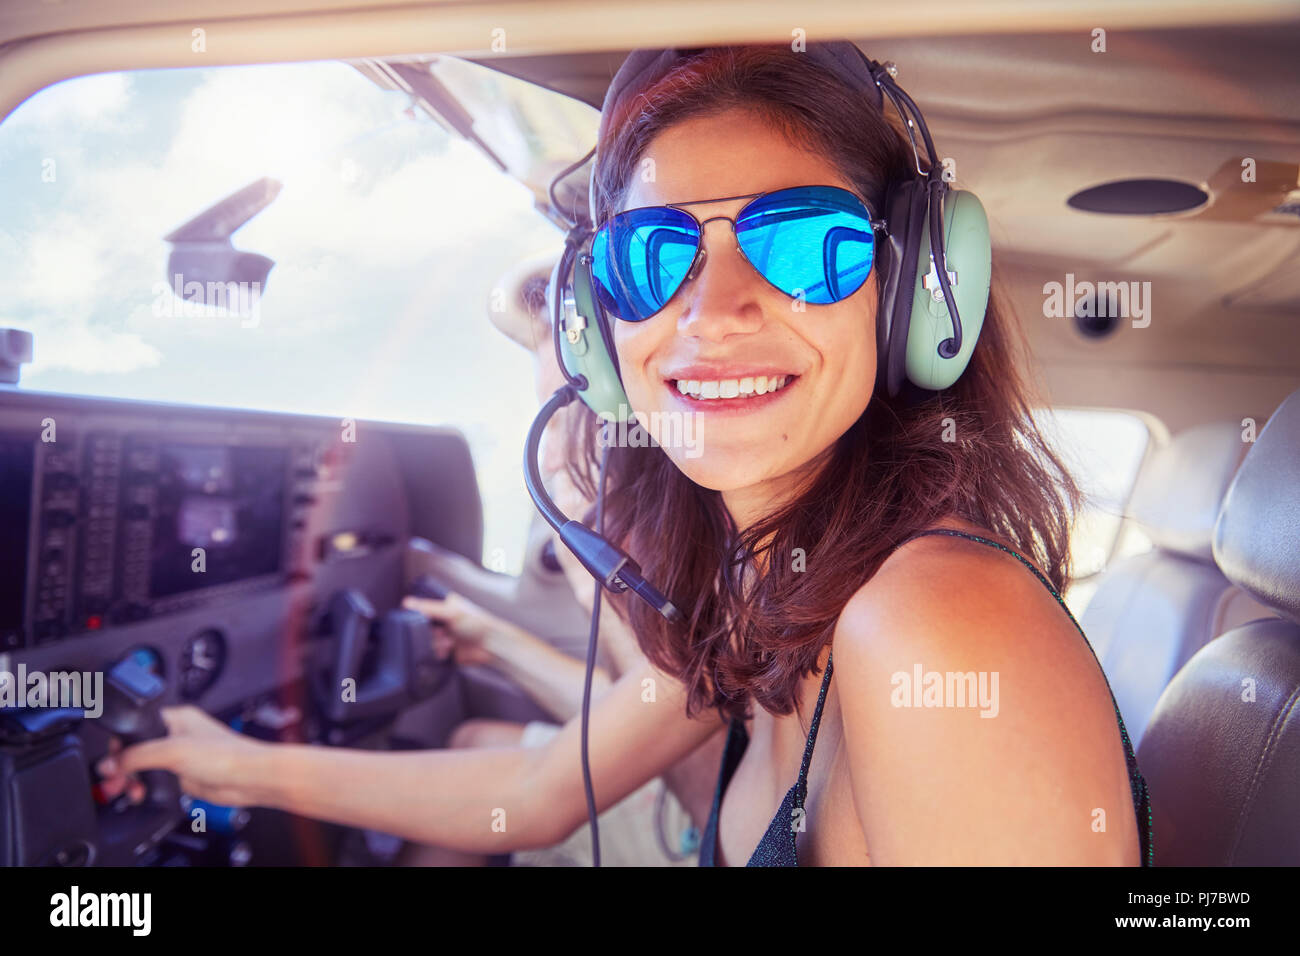 Portrait smiling, confident young woman flying airplane Stock Photo